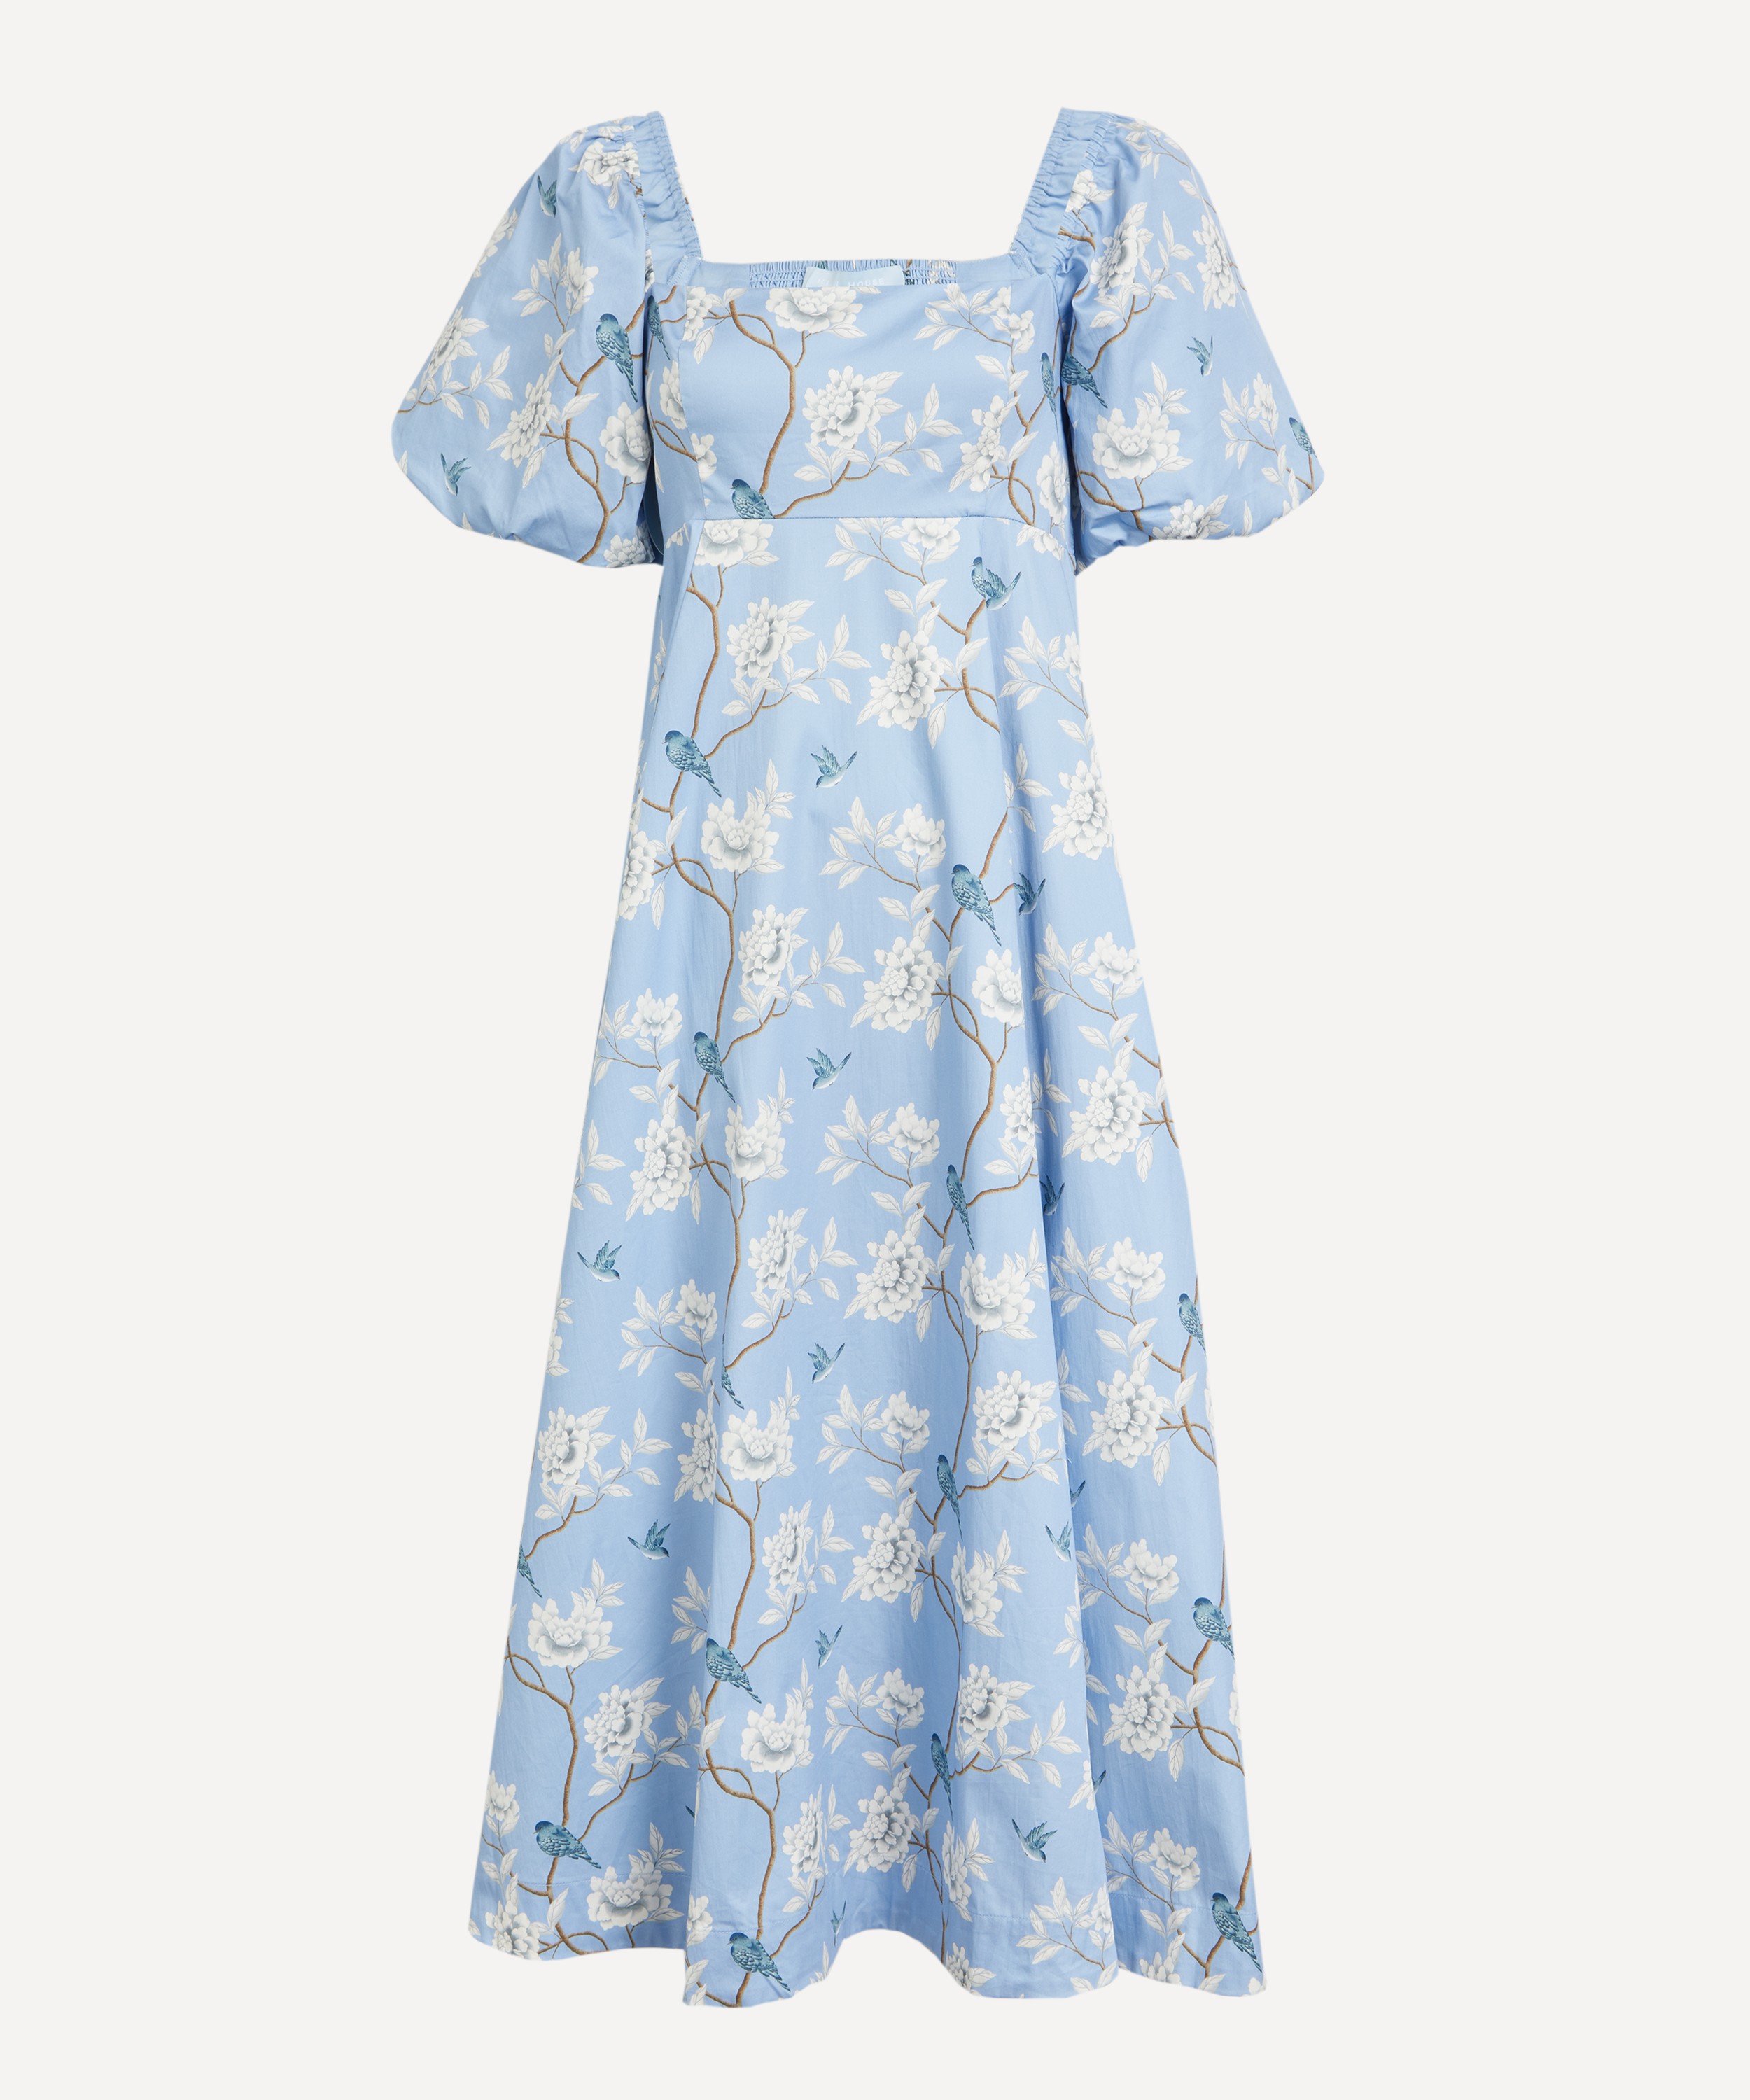 Hill House Home - Matilda Dress in Blue Chinoiserie